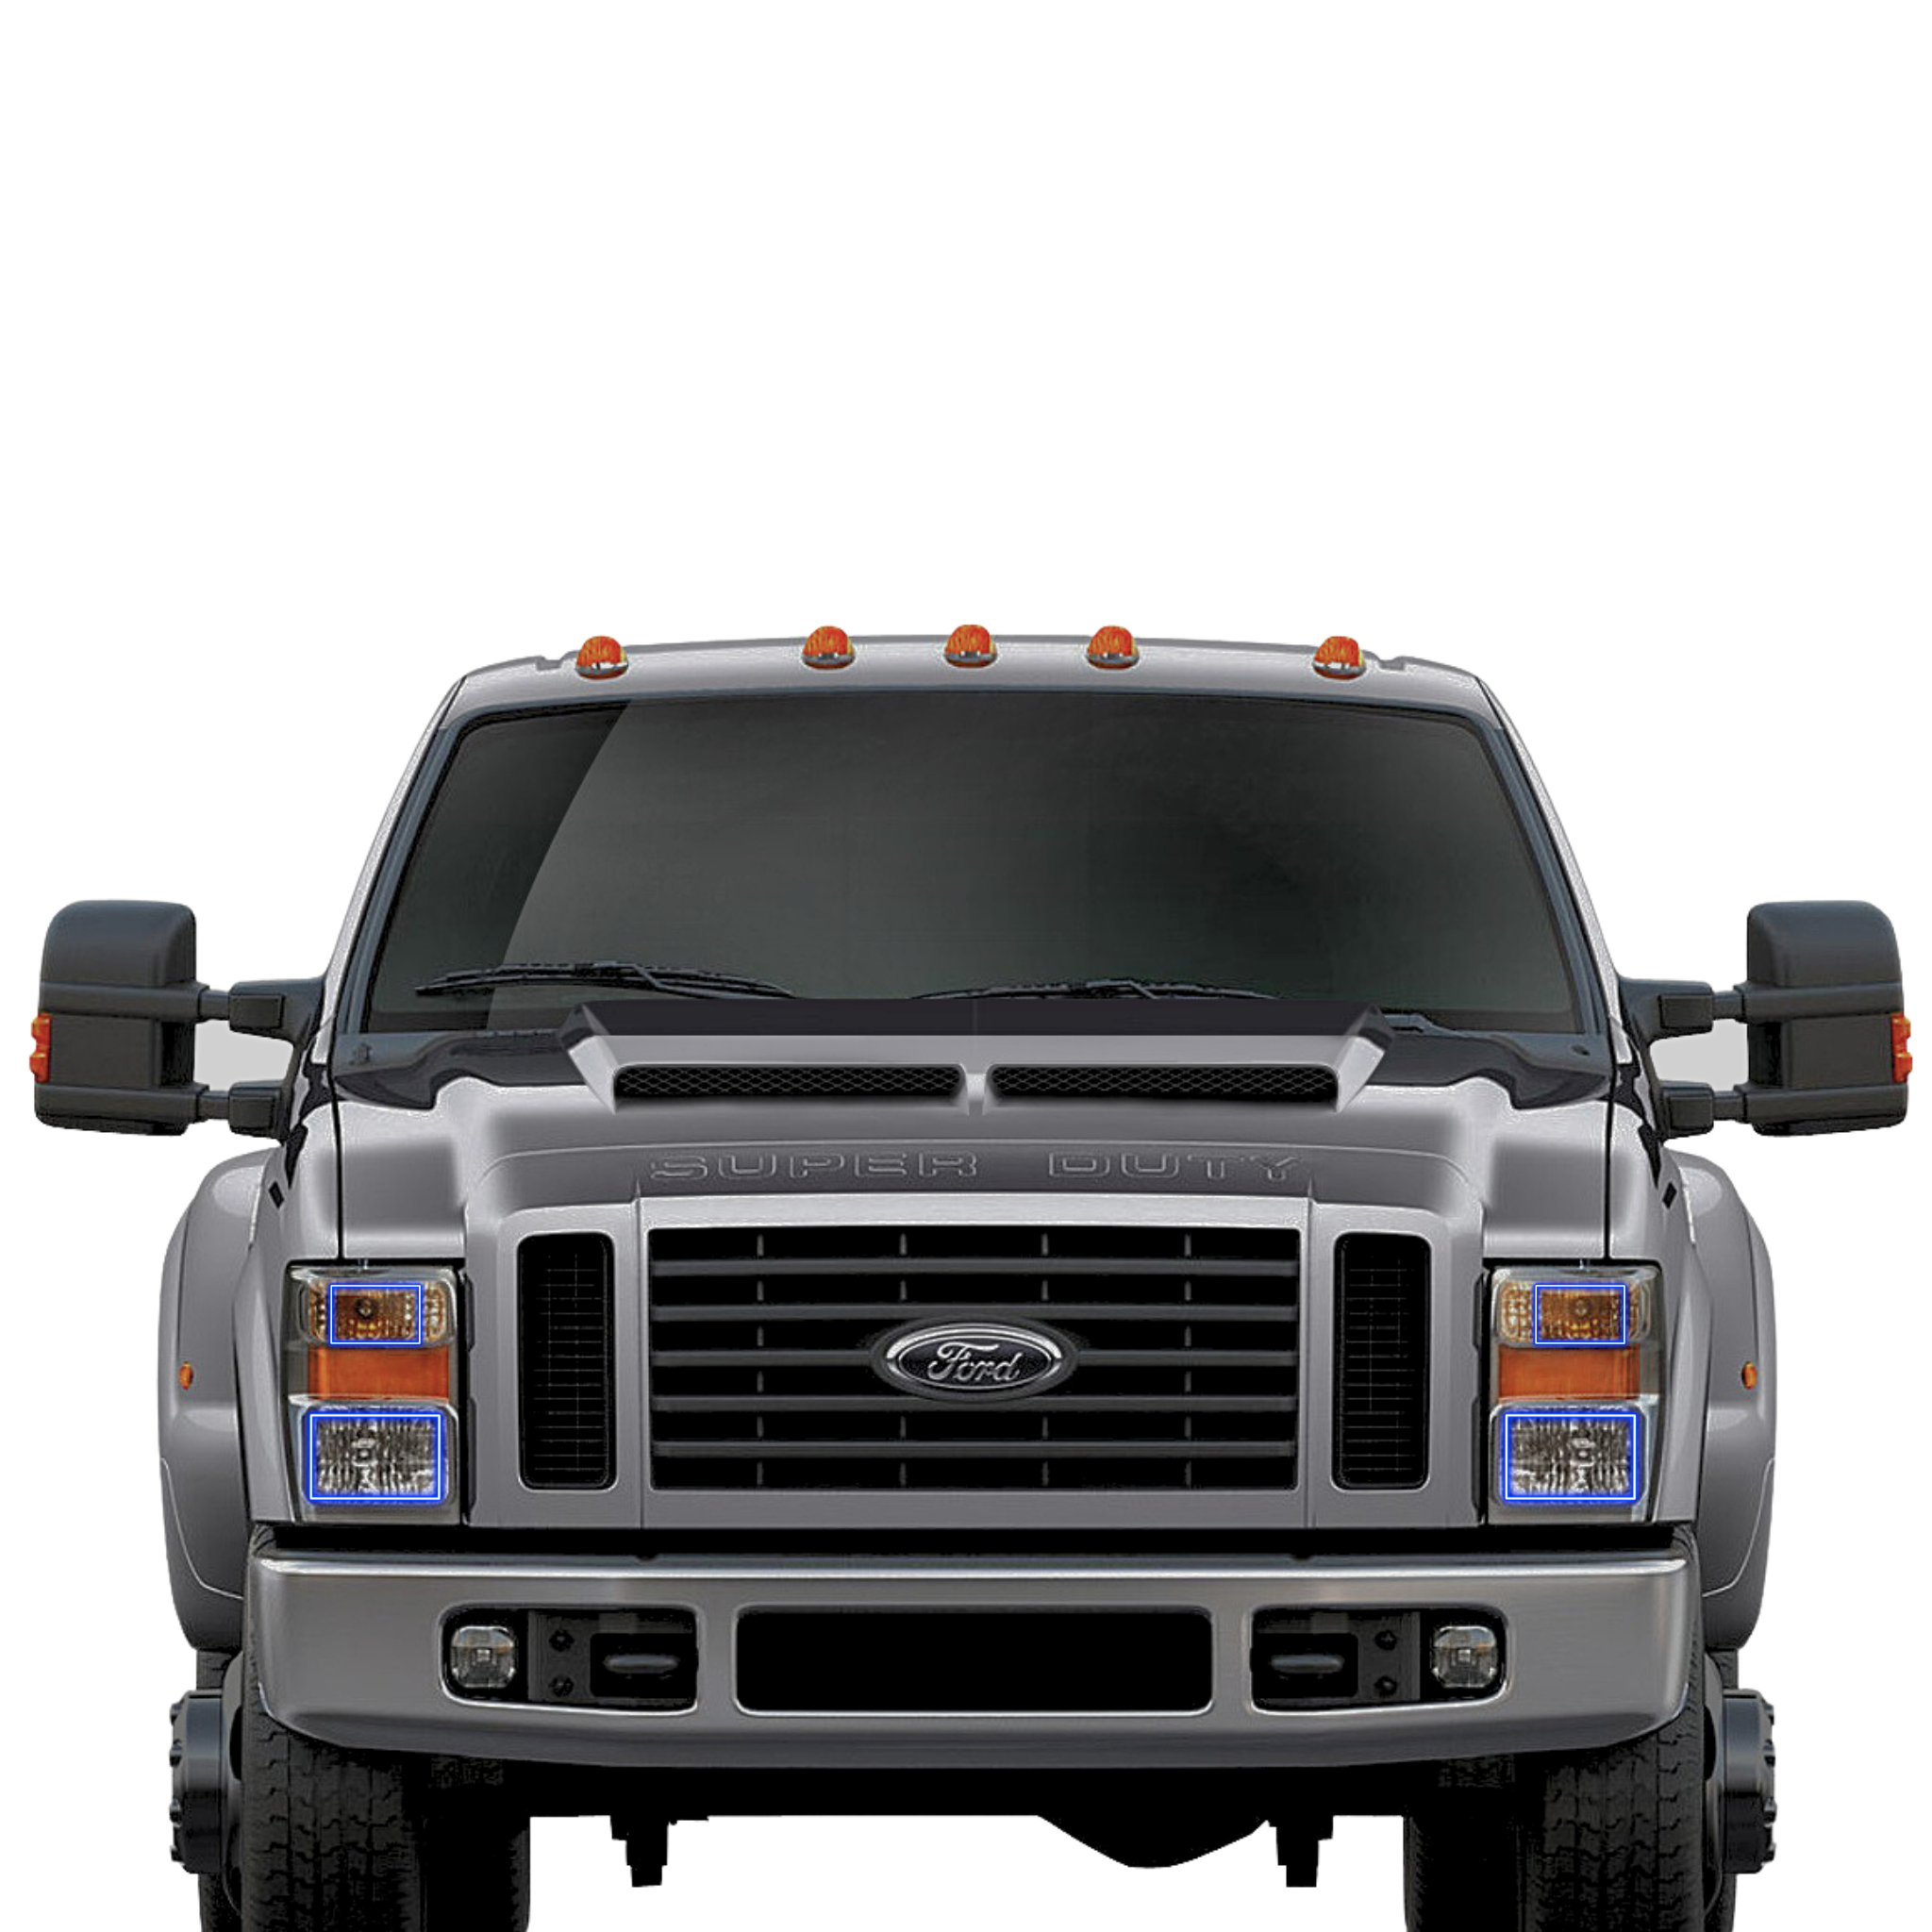 2008-2010 Ford Super Duty Multicolor Halo Kit - RGB Halo Kits Multicolor Flow Series Color Chasing RGBWA LED headlight kit Colorshift Oracle Lighting Trendz OneUpLighting Morimoto theretrofitsource AutoLEDTech Diode Dynamics